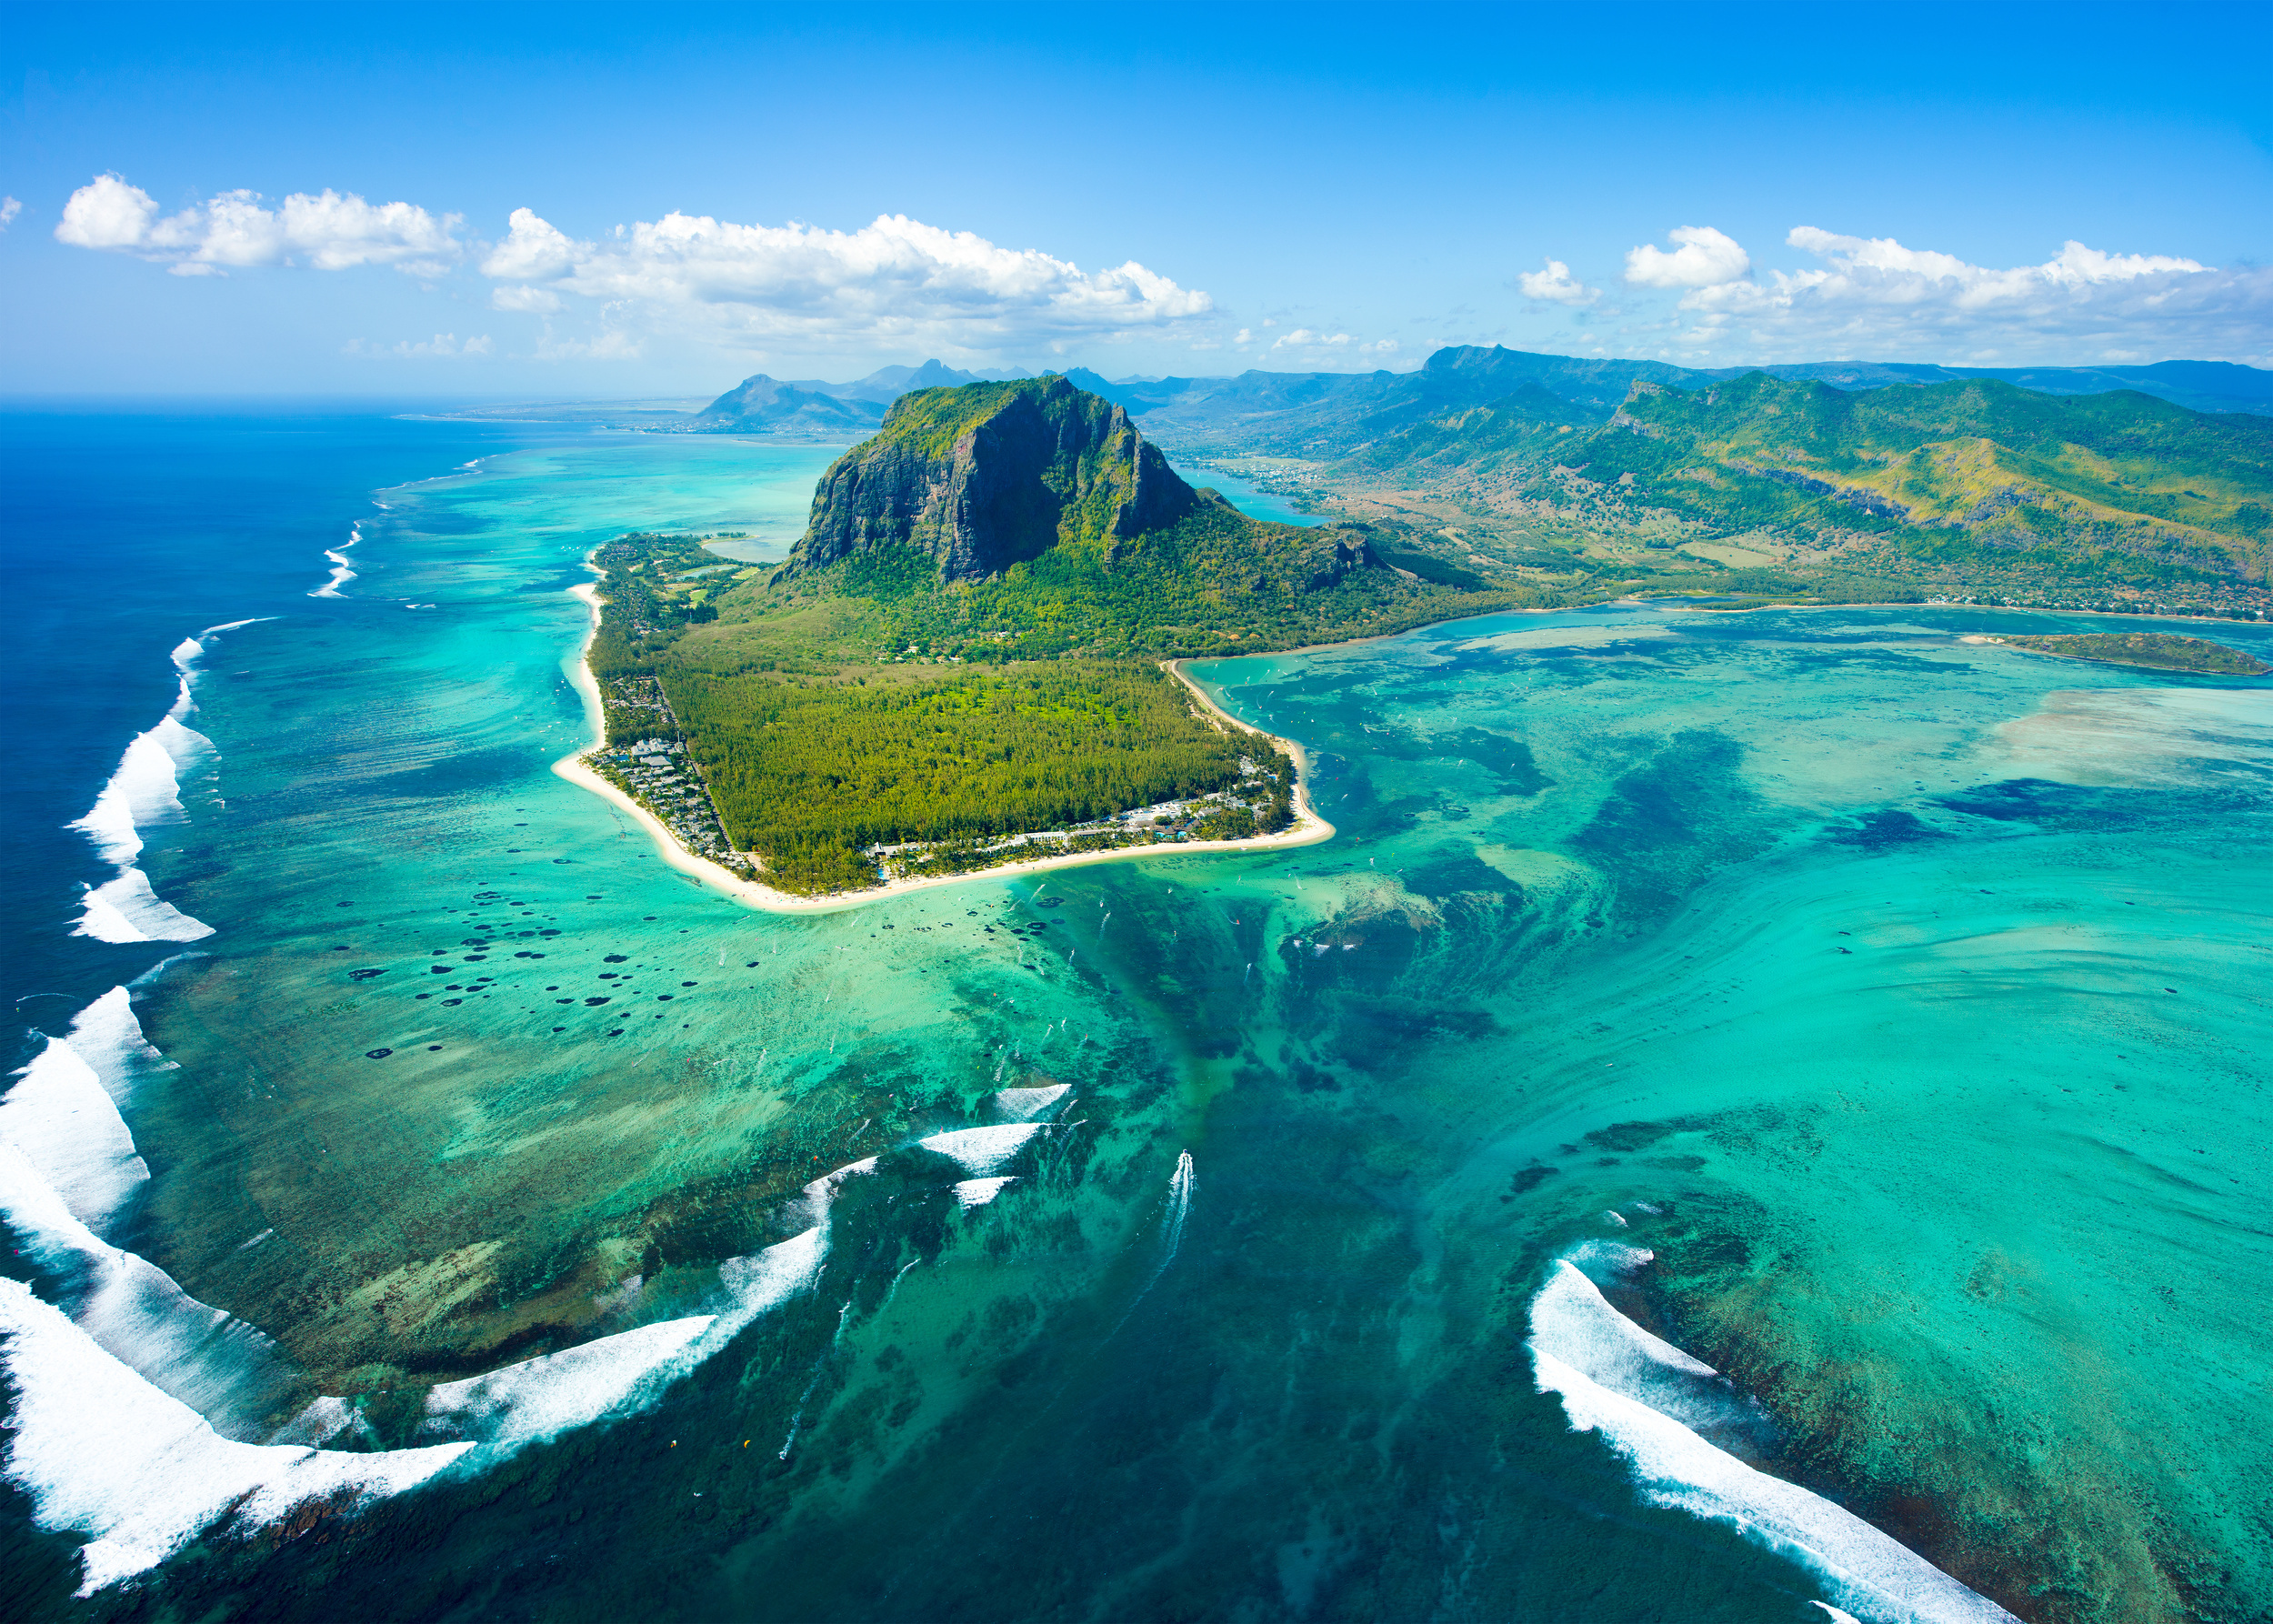 <p>A less-often thought-of destination, Mauritius should be at the top of your escape-winter list. The island nation is balmy year-round and much cheaper than other similar vacation spots such as the Maldives and the Seychelles.</p><p>You may also like: <a href='https://www.yardbarker.com/lifestyle/articles/when_were_these_24_iconic_fast_food_restaurants_founded_021724/s1__37779777'>When were these 24 iconic fast food restaurants founded?</a></p>